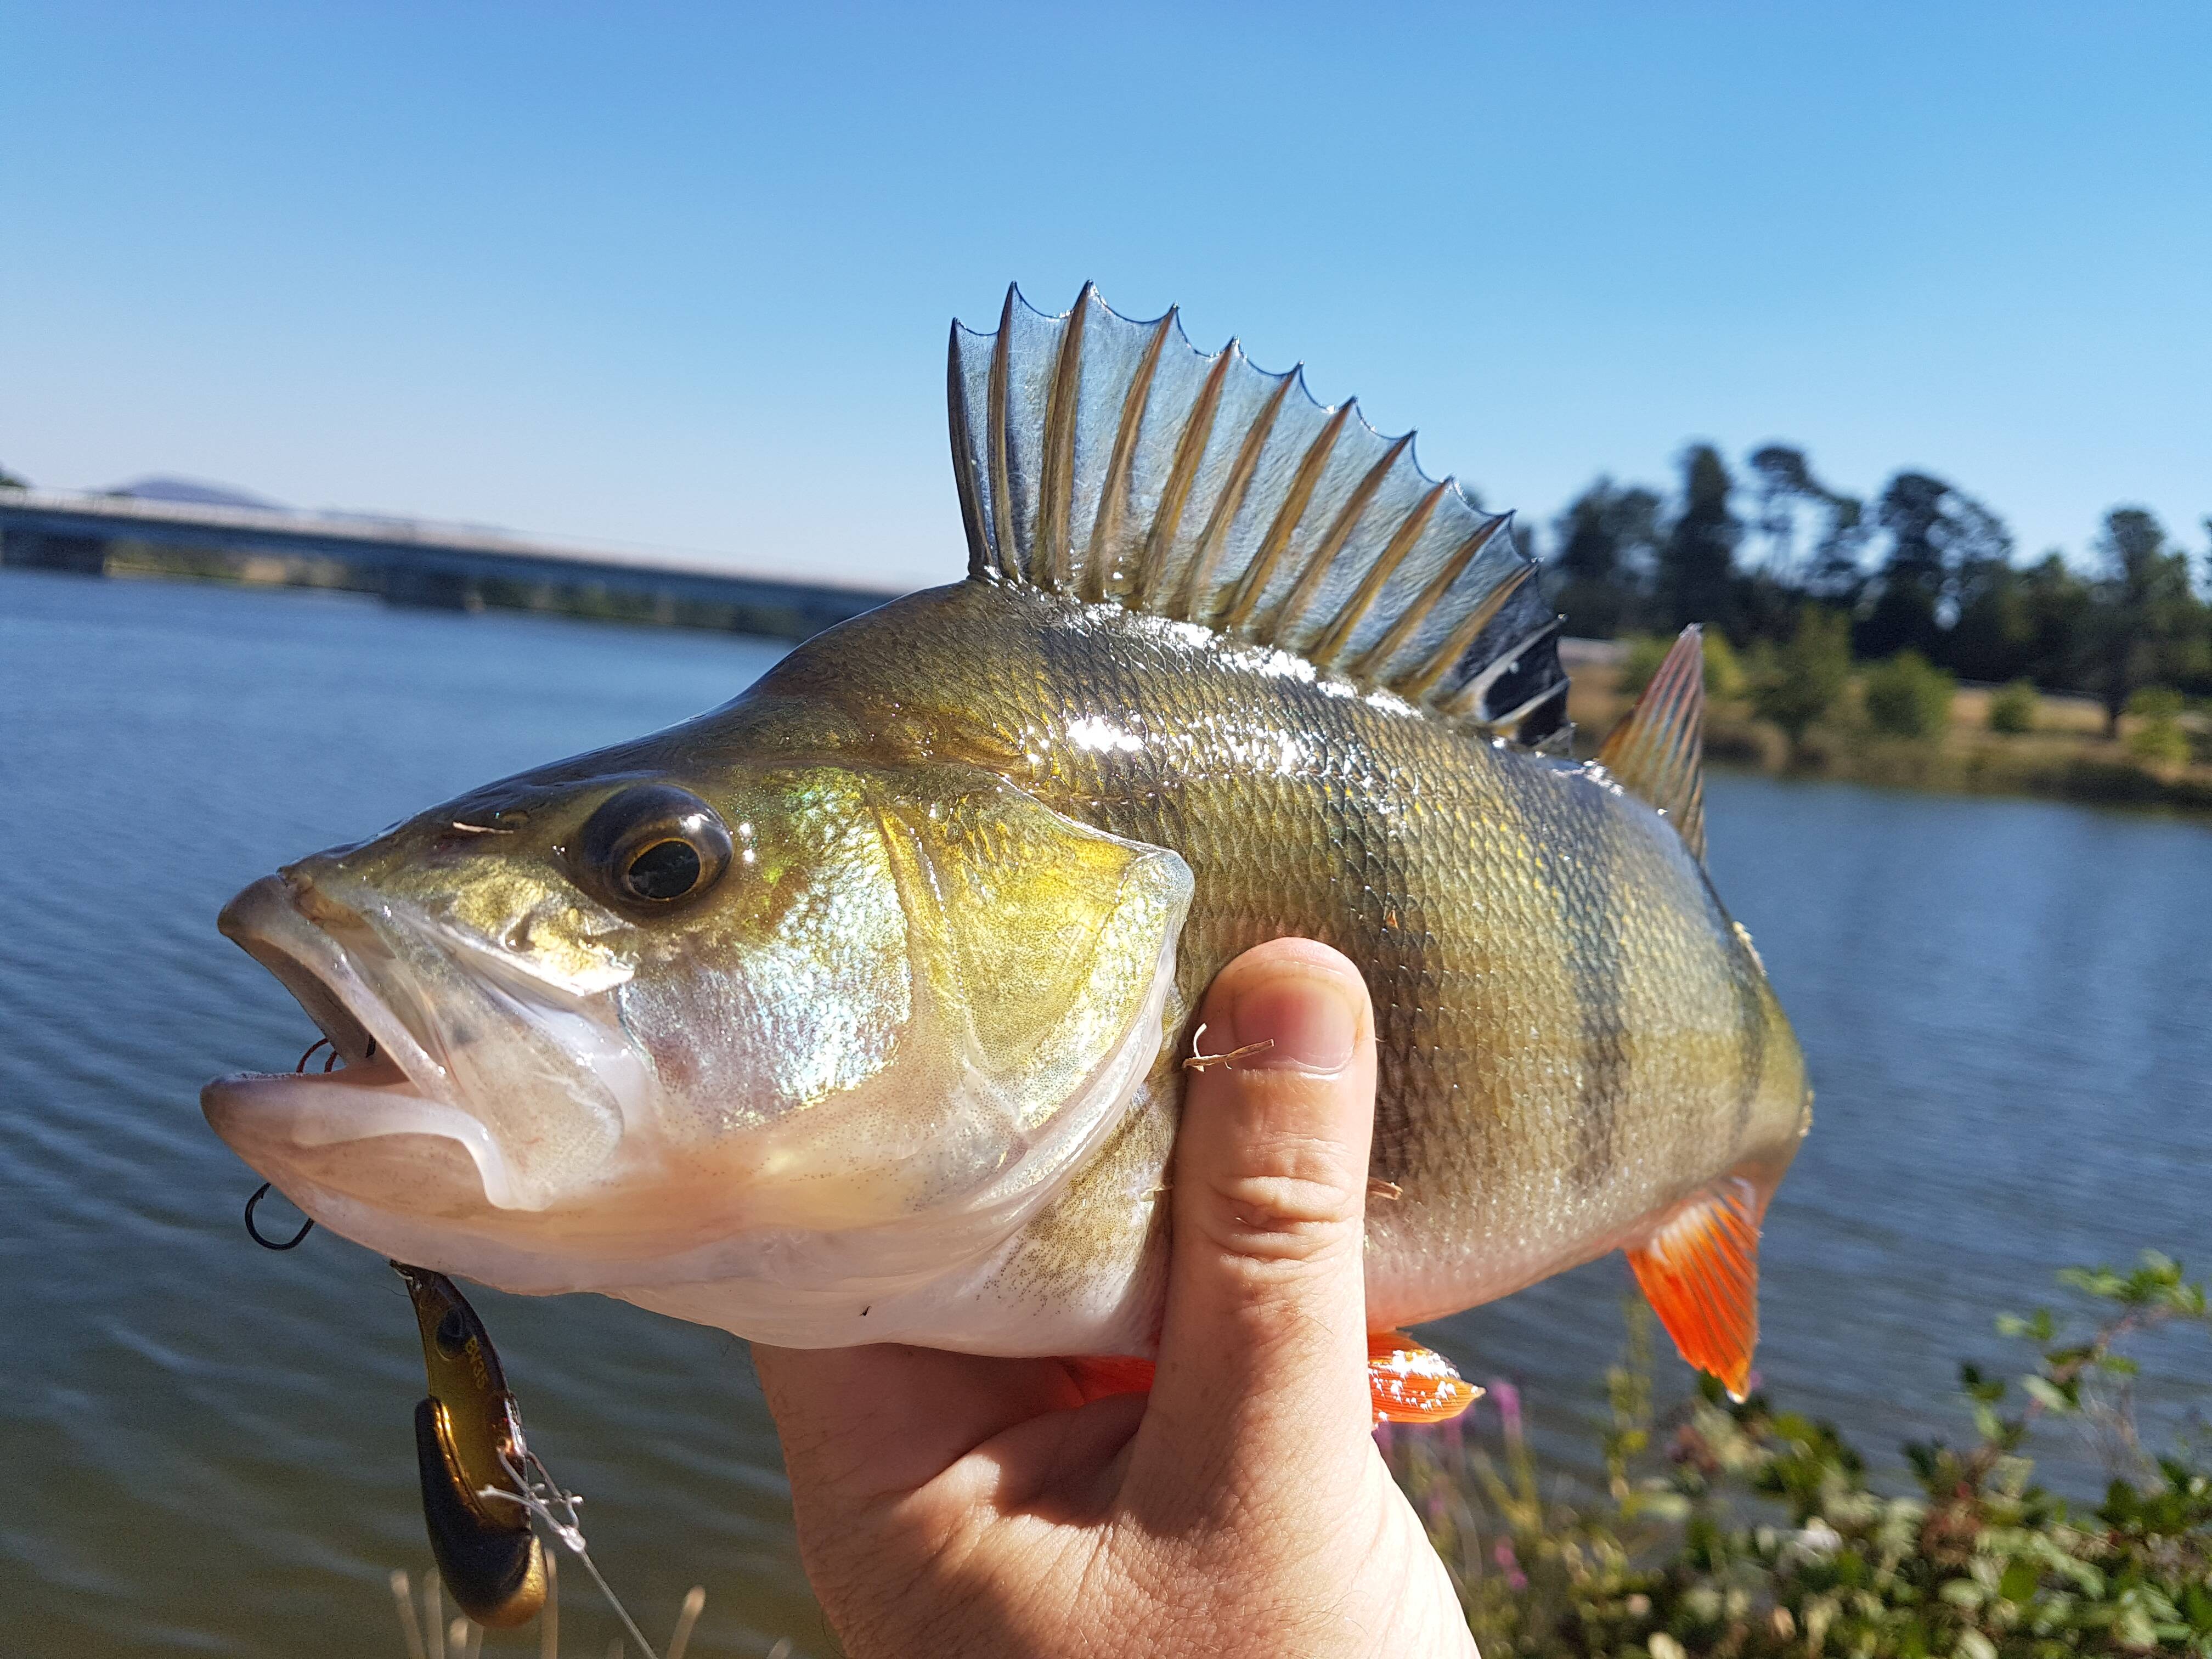 Cheap Redfin Perch fishing lures do they work? 